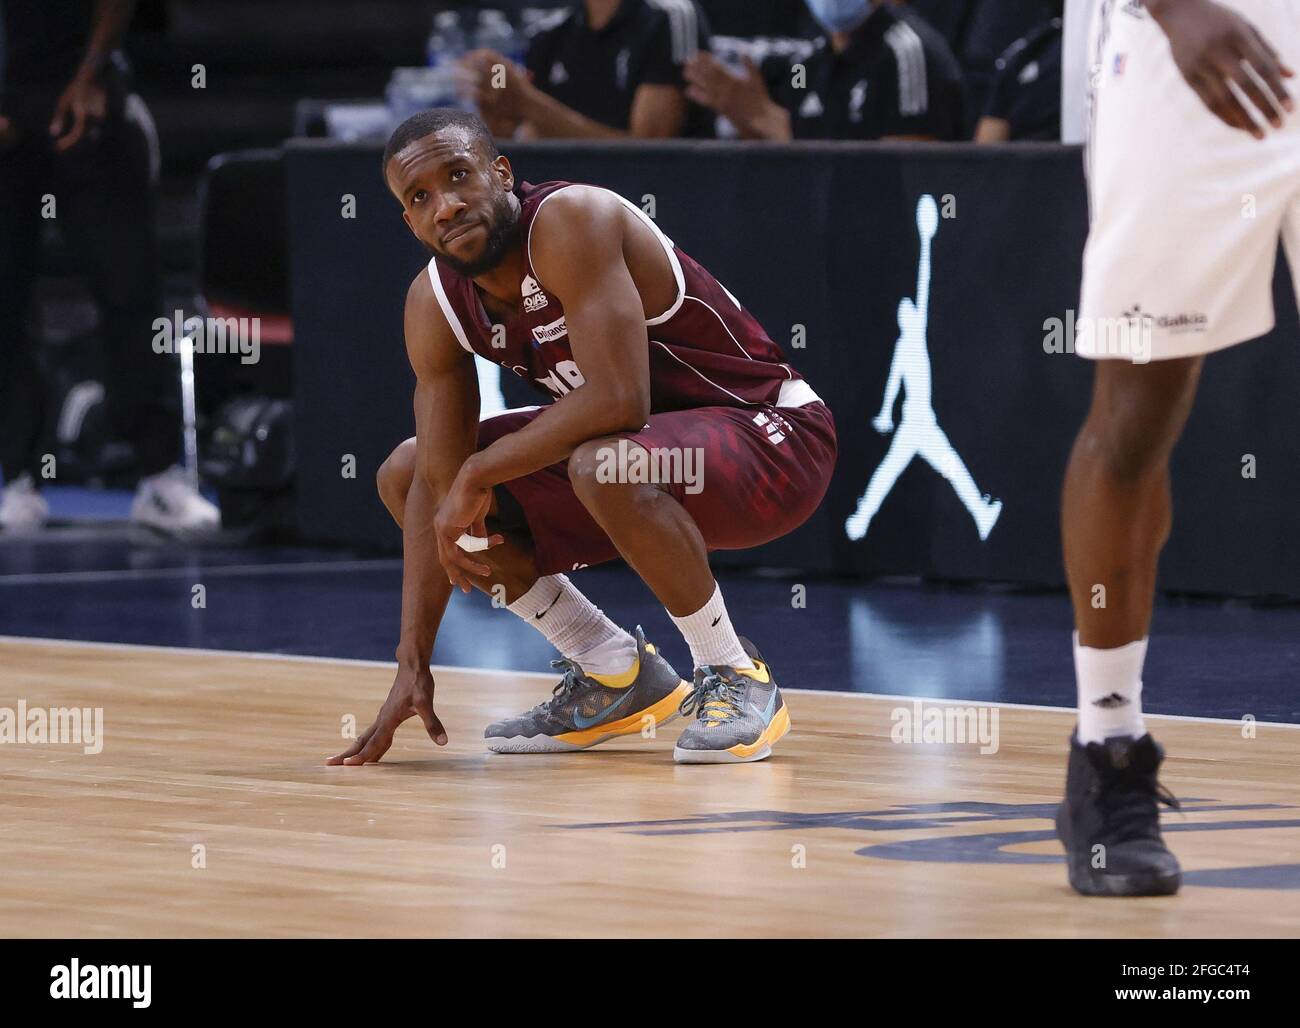 DAVID HOLSTON (USA) Point guard of Dijon in action during the Basketball  French Cup JDA Dijon v Tony Parker-owned ASVEL Lyon-Villeurbanne at  AccorHotels Arena Stadium on April 24, 2021 in Paris, France.